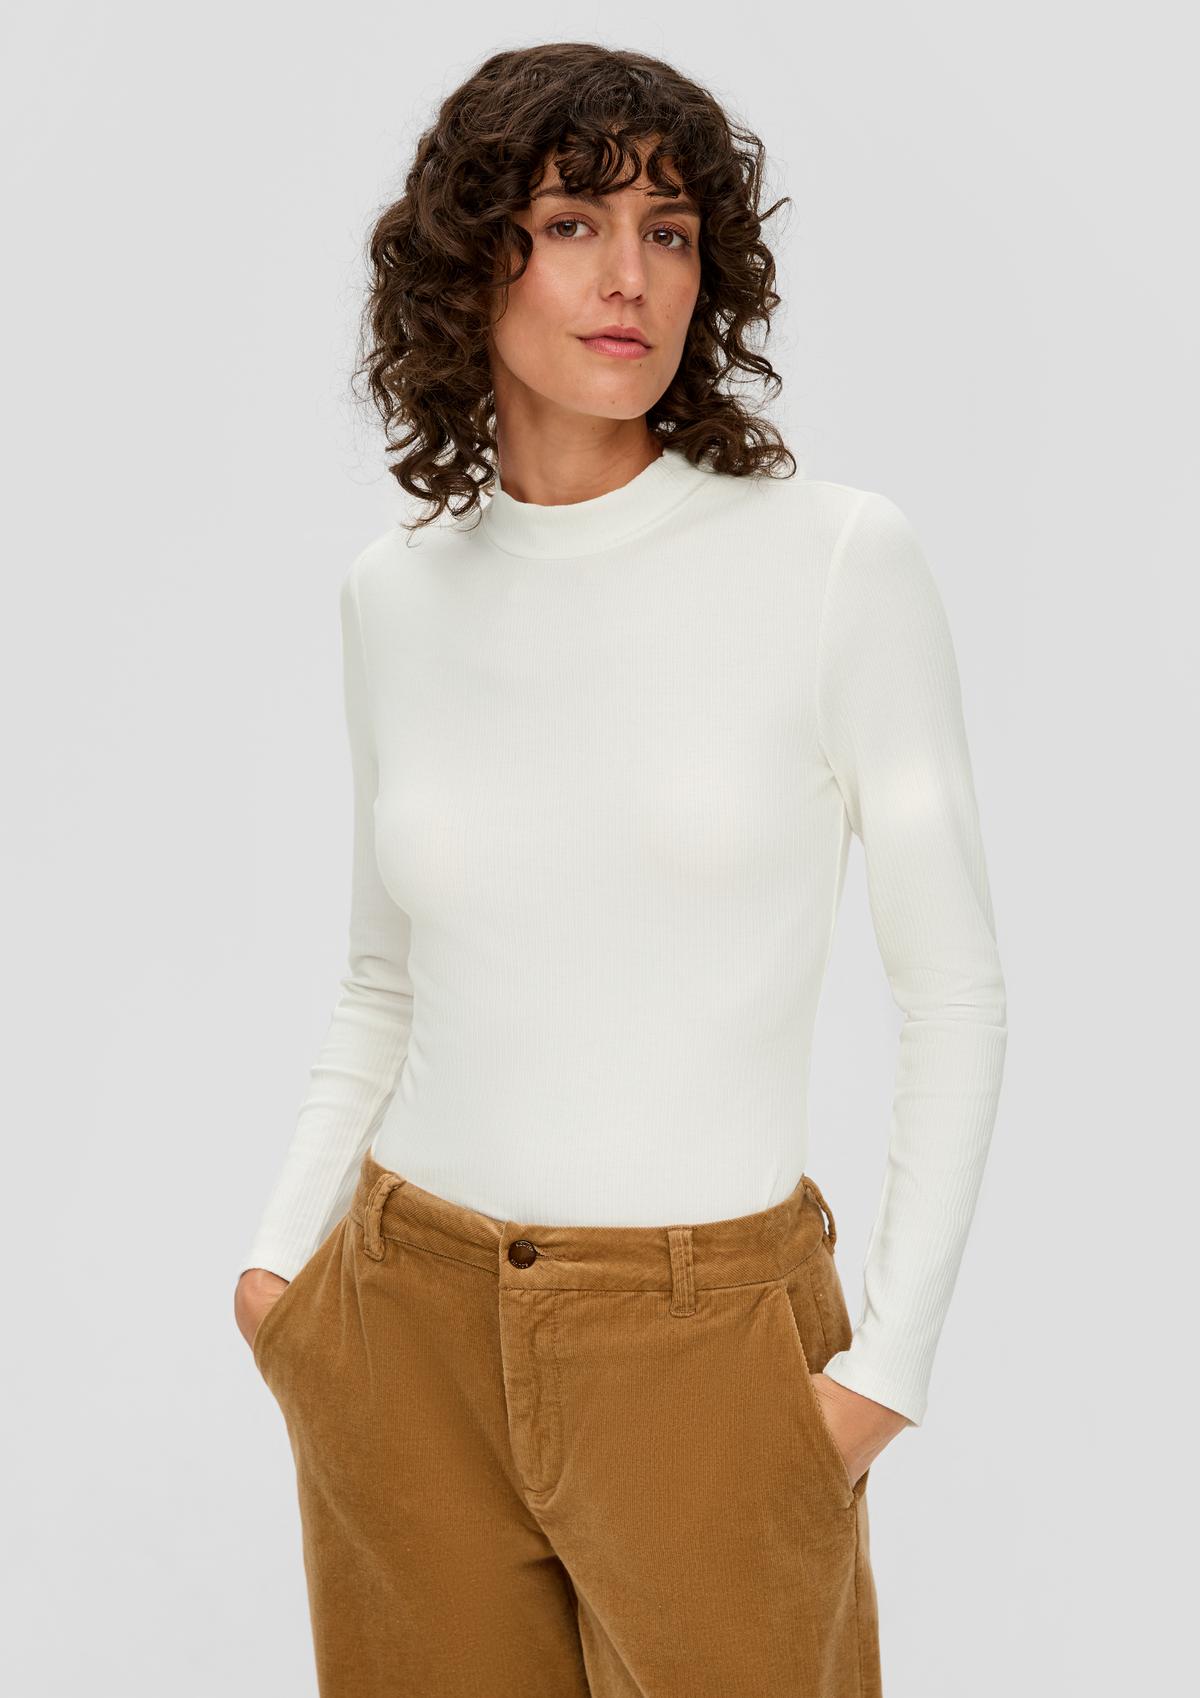 Long sleeve top with a ribbed texture